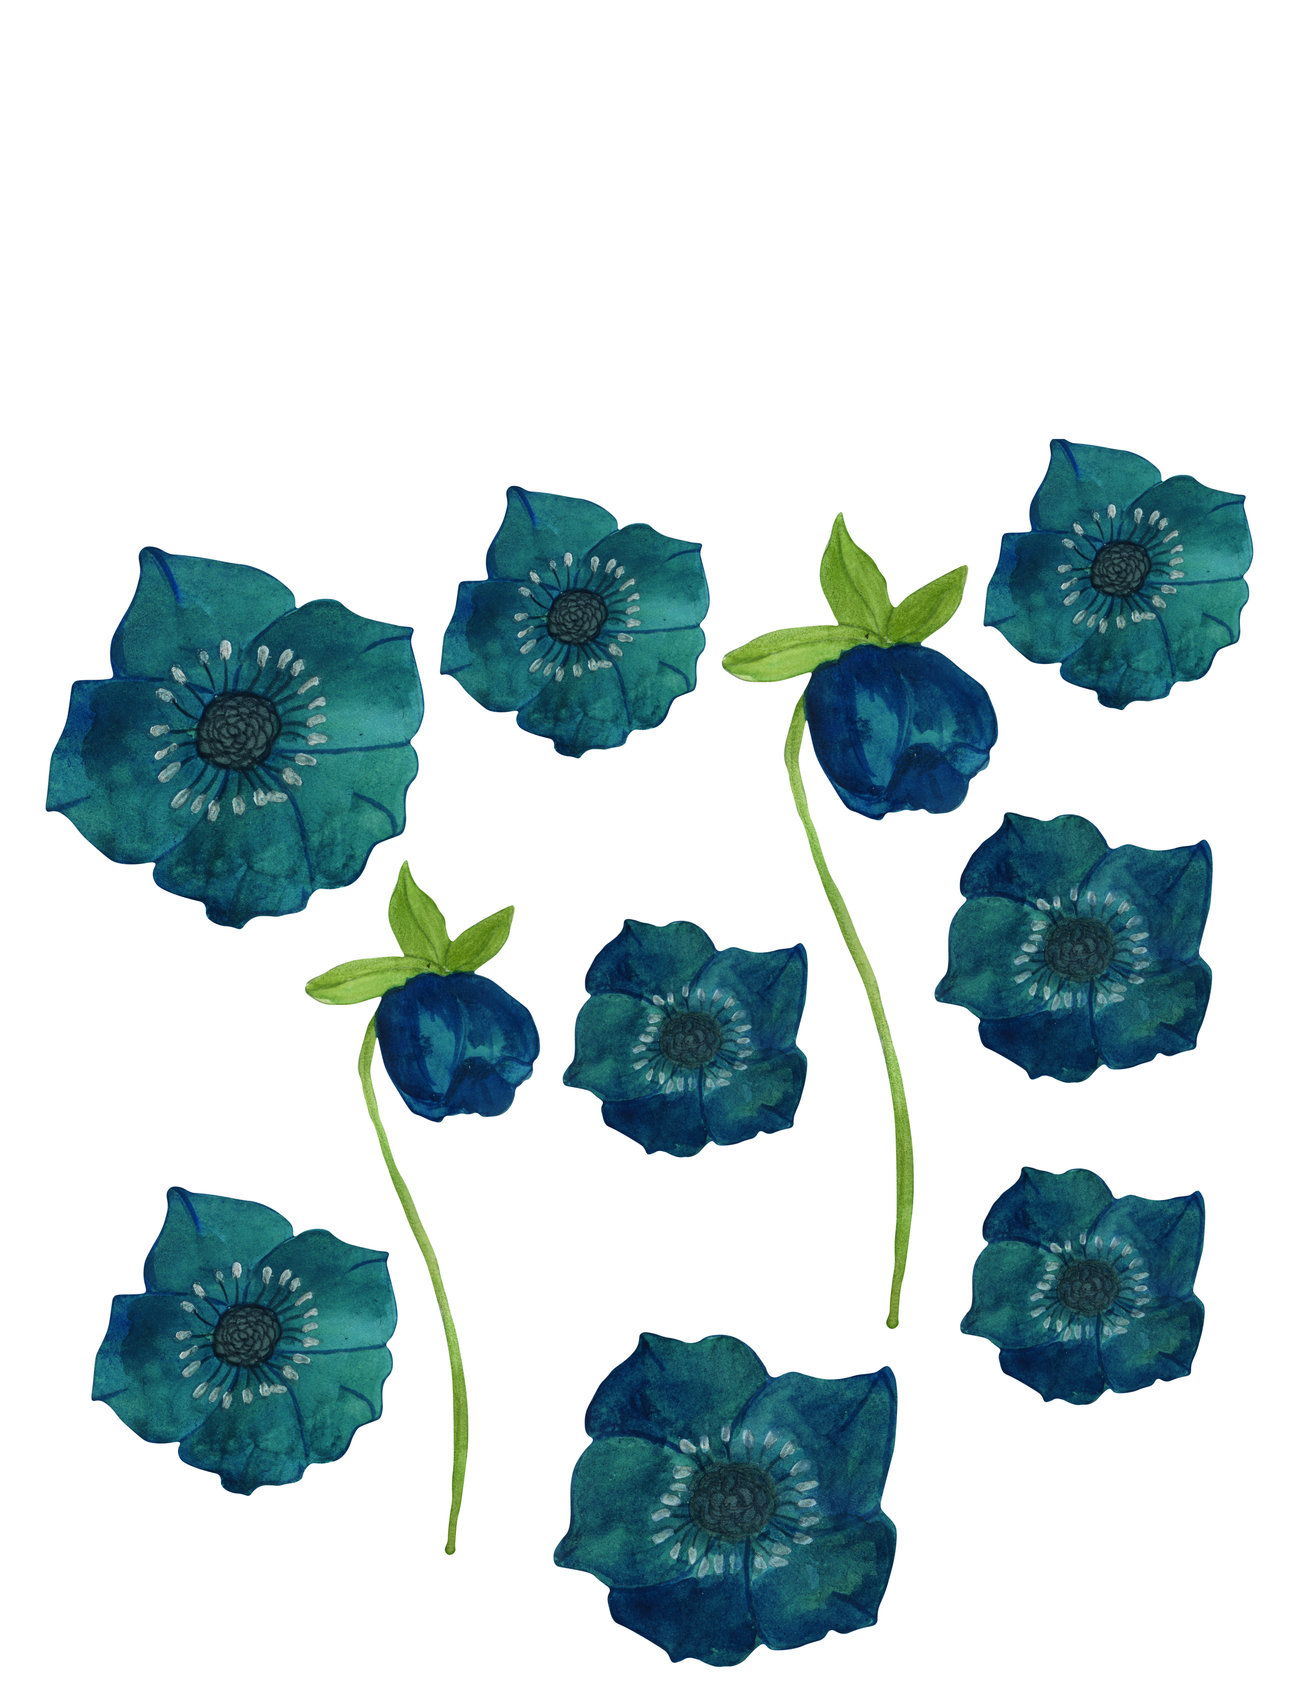 Wall Sticker Blue Flowers 10 Pcs. Home Kids Decor Wall Stickers Nature Multi/patterned That's Mine